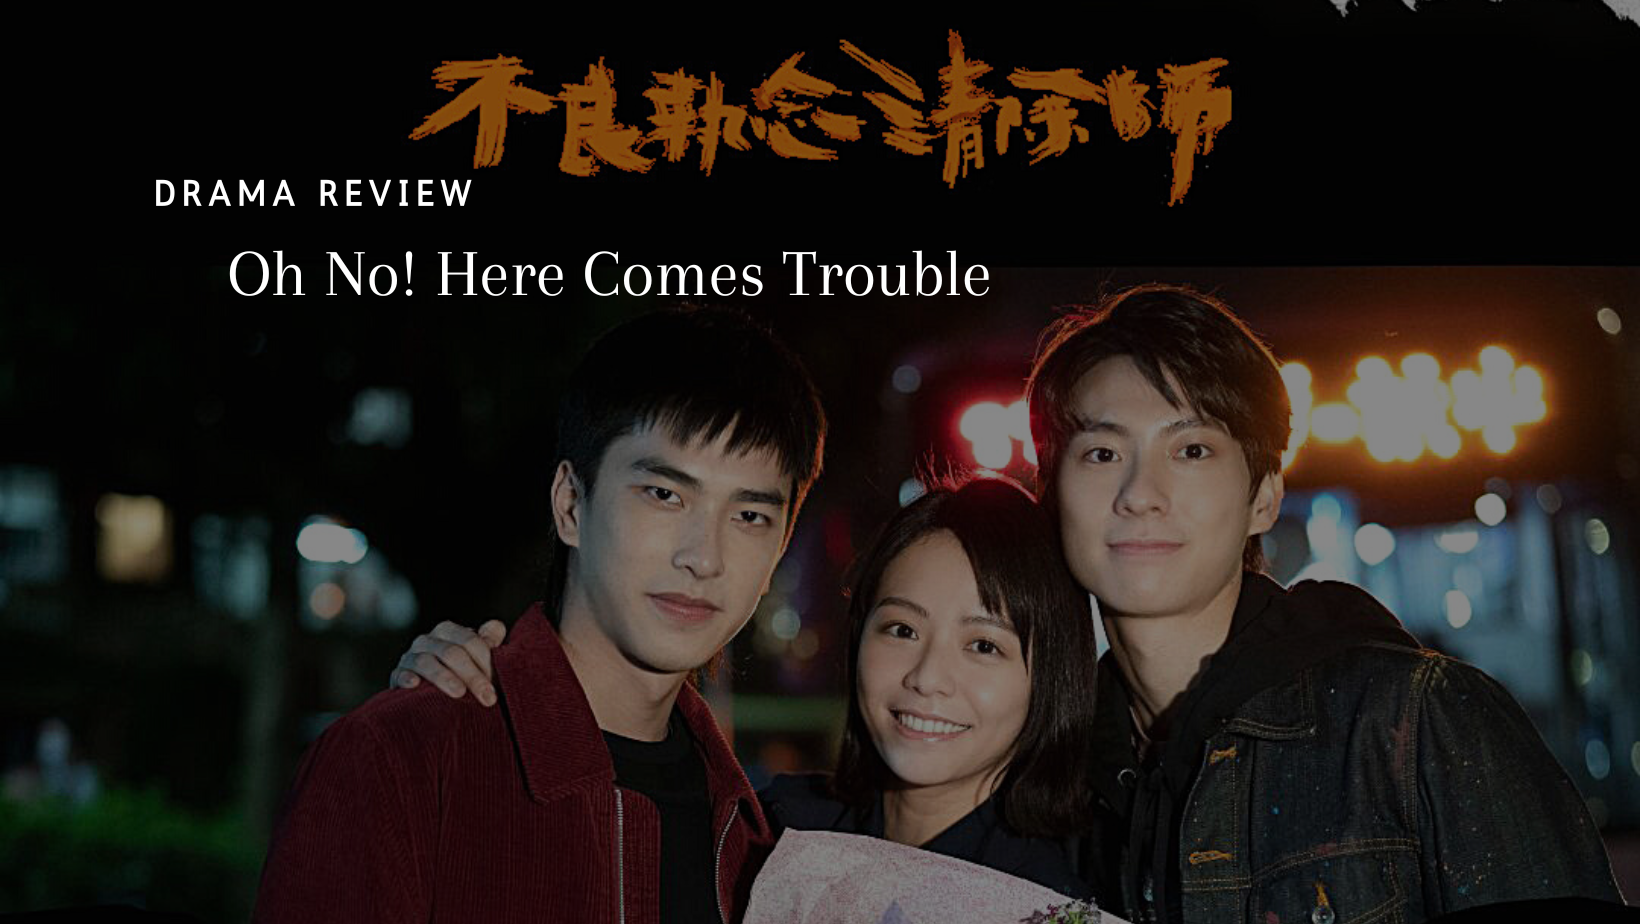 Drama Review: Oh No! Here Comes Trouble